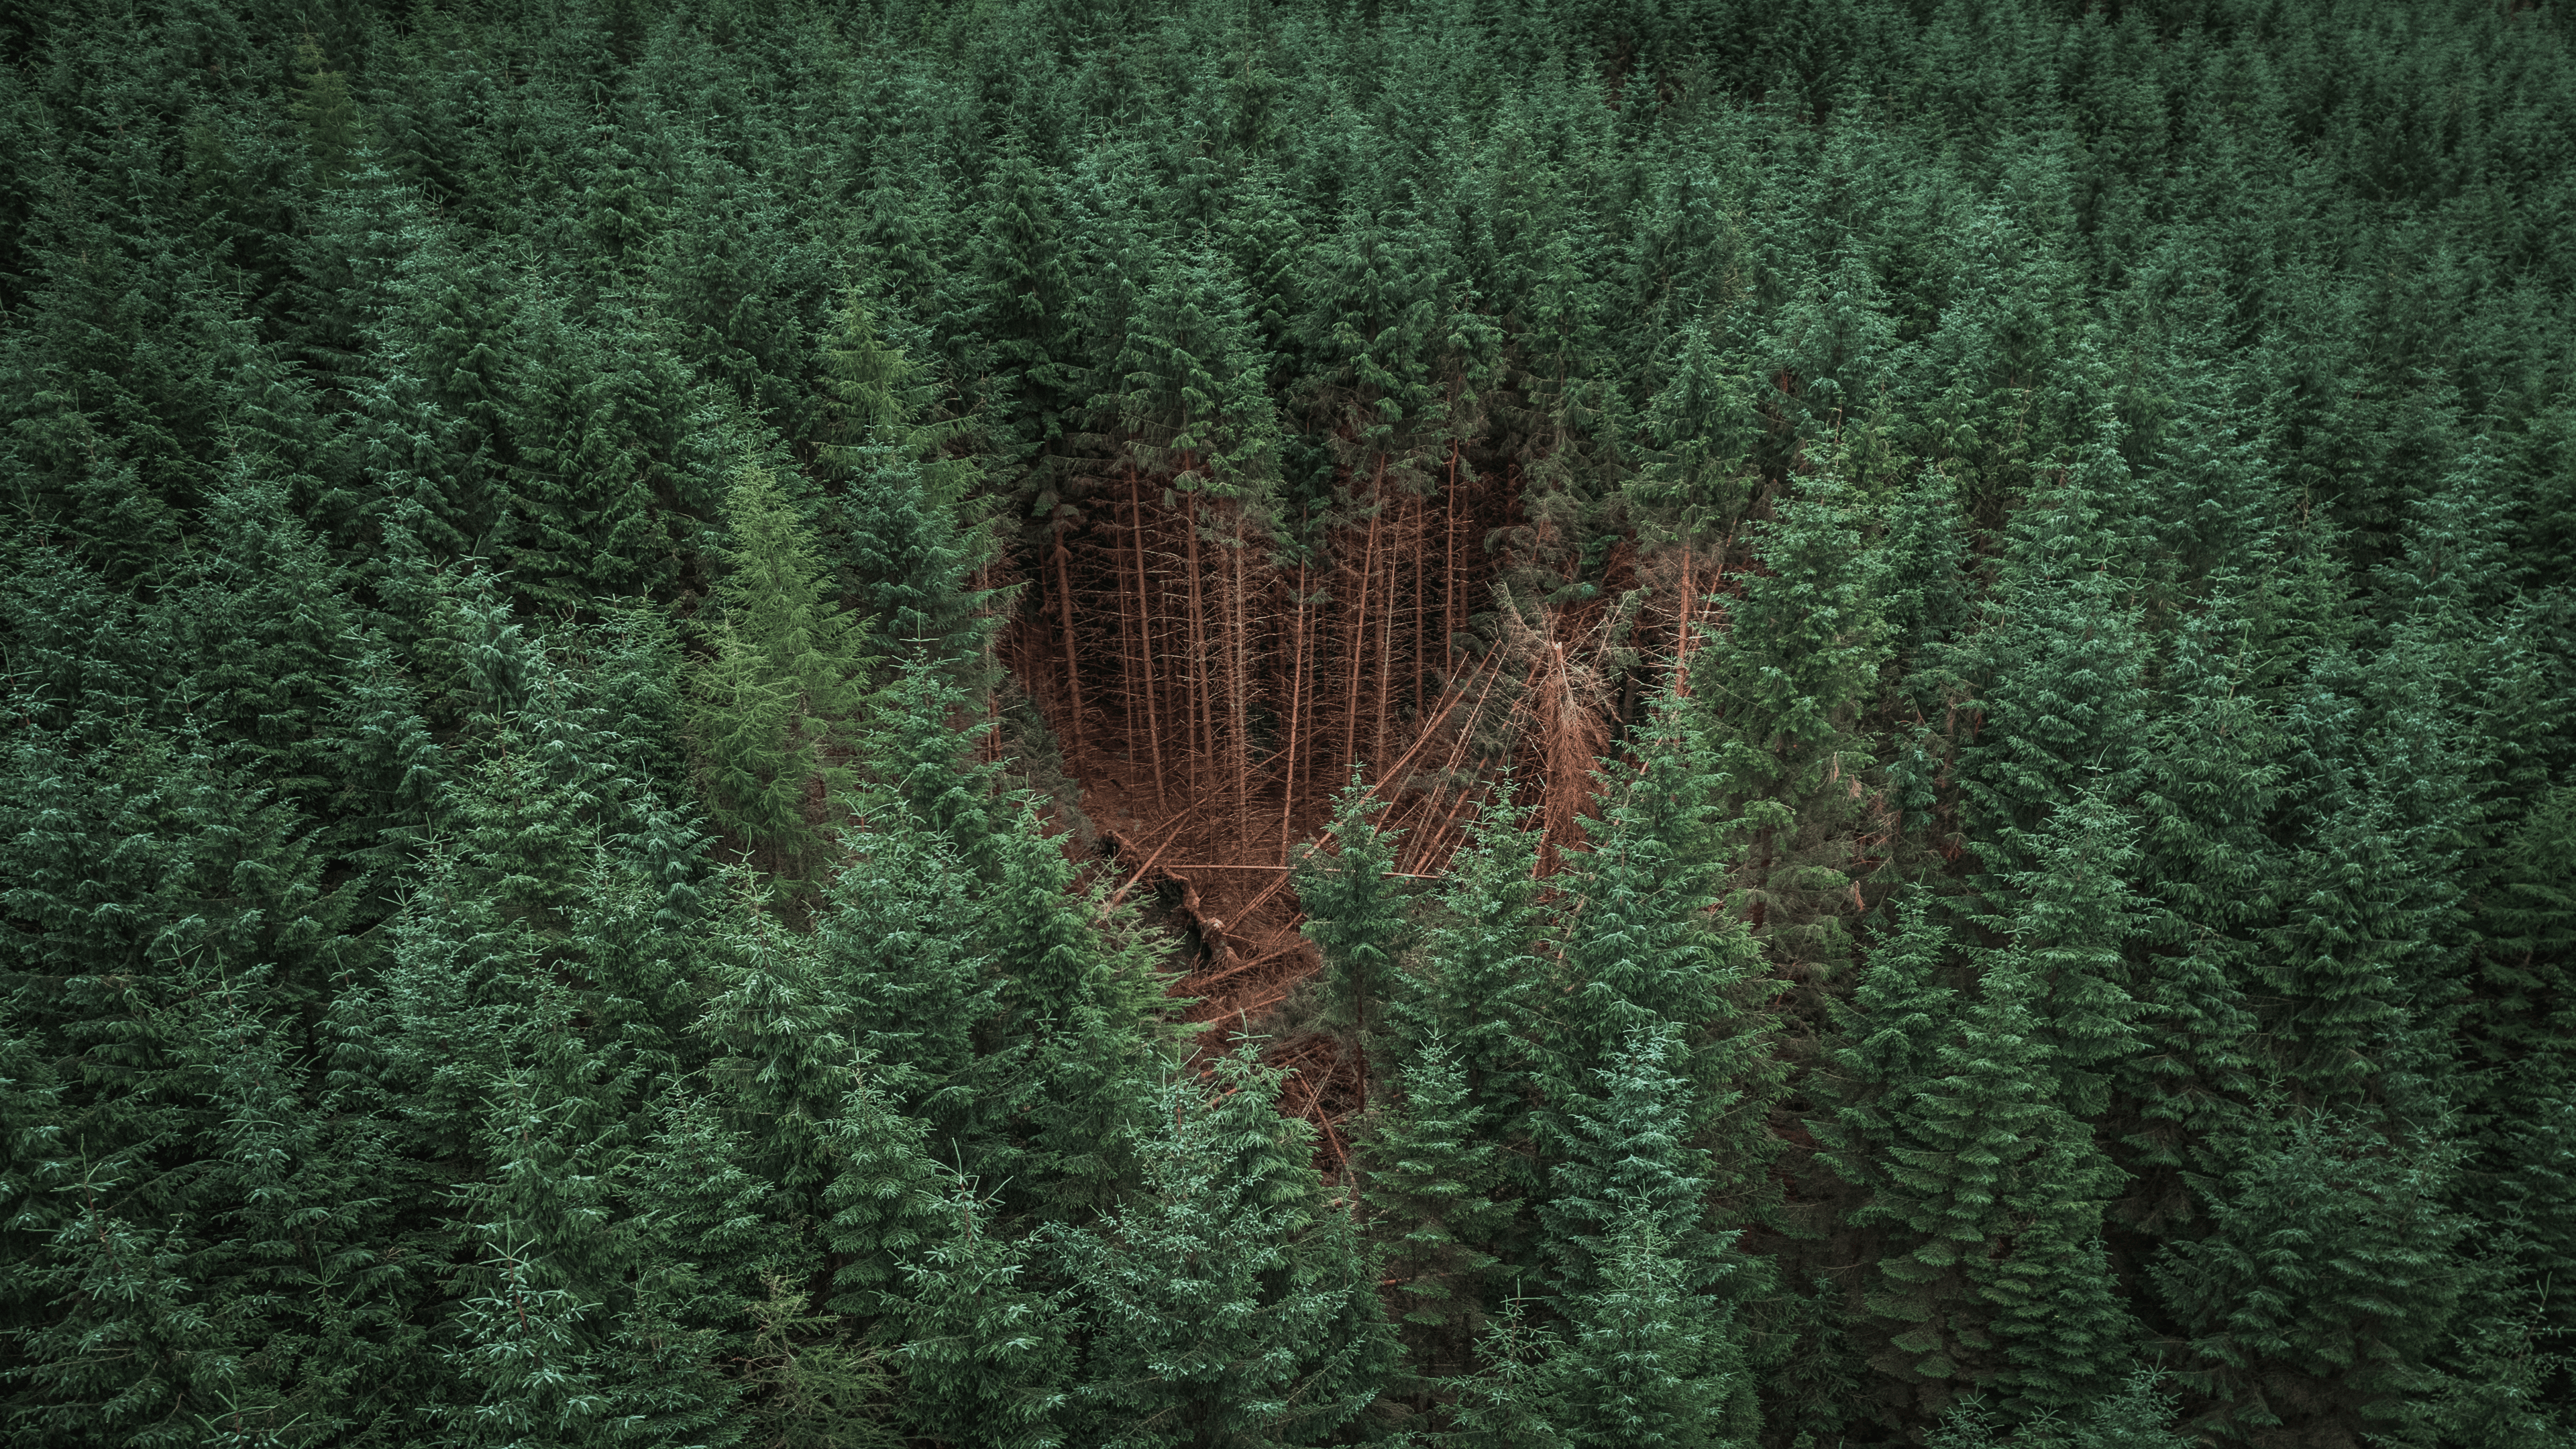 Destruction in the Heart of the Forest